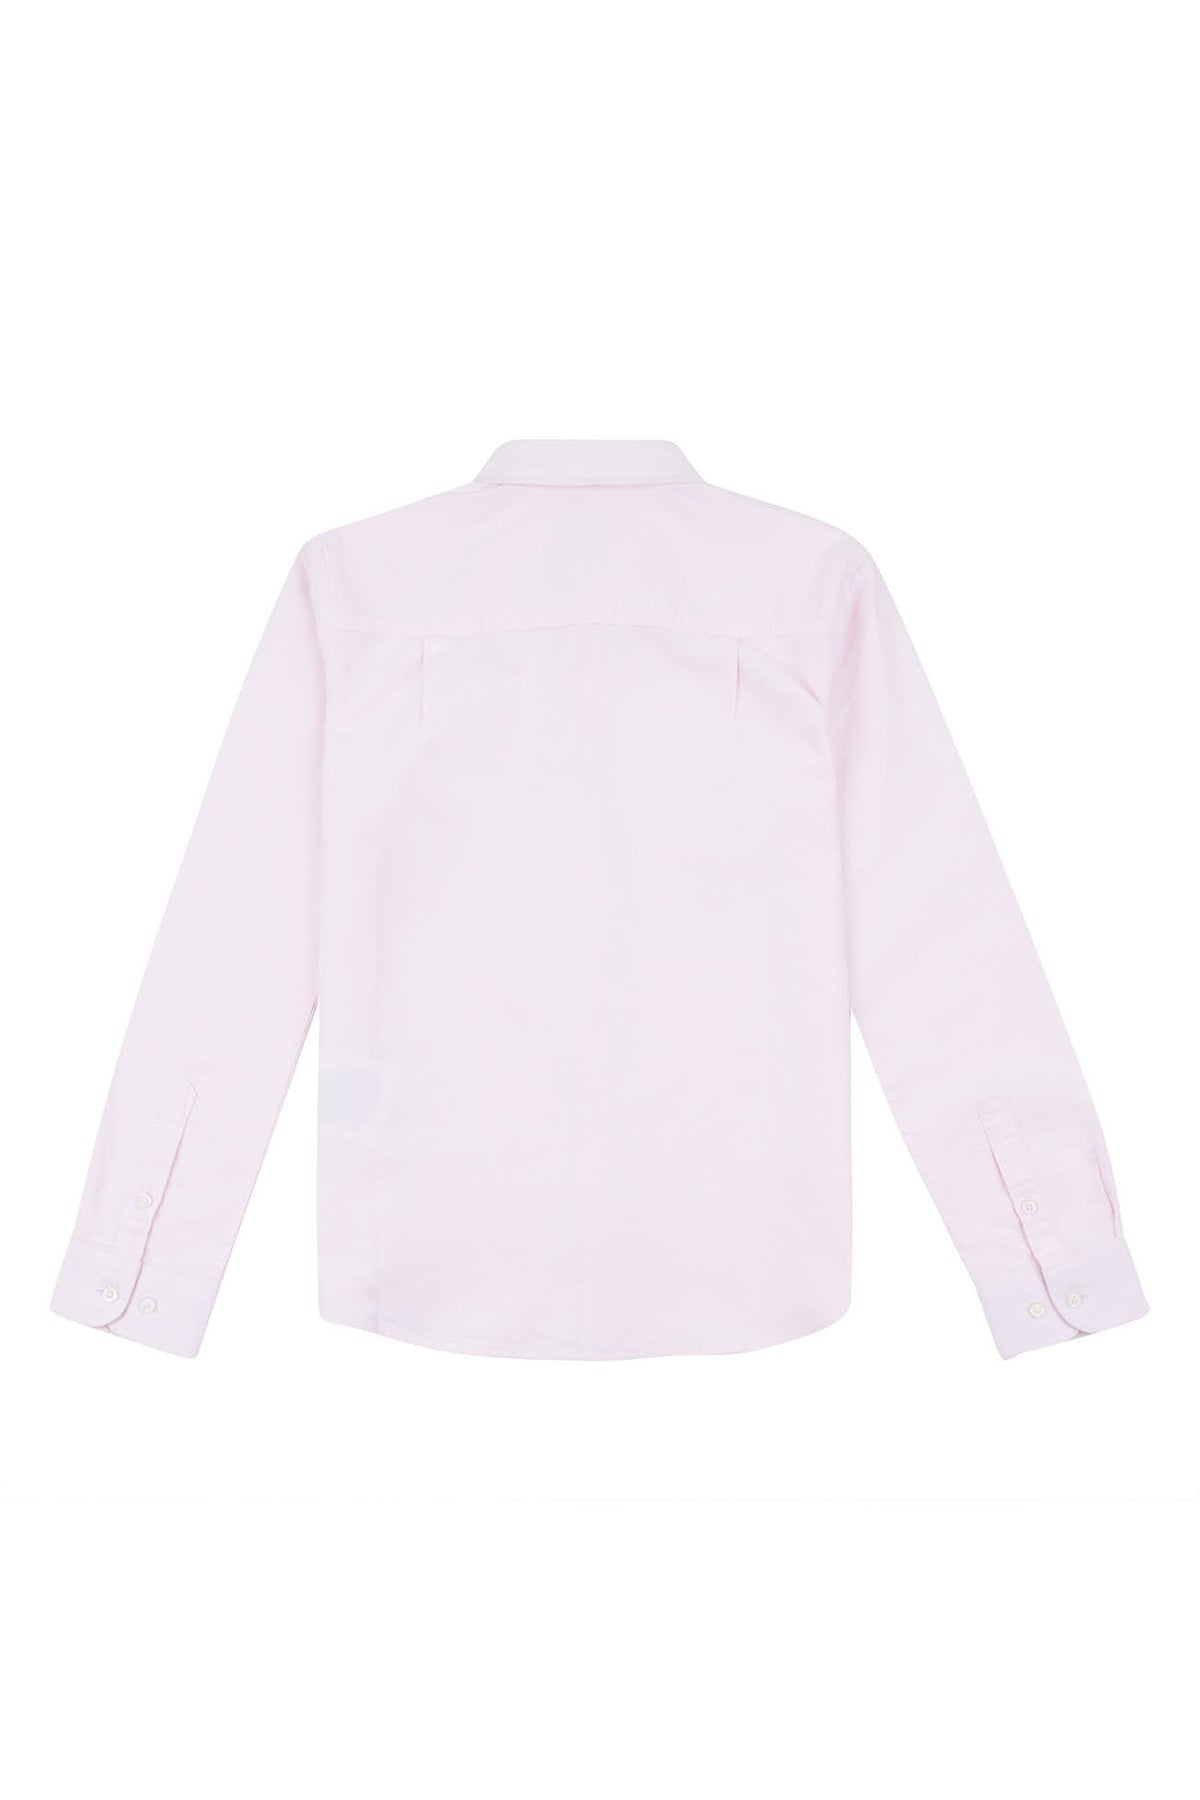 Boys Lifestyle Peached Oxford Shirt in Orchid Pink